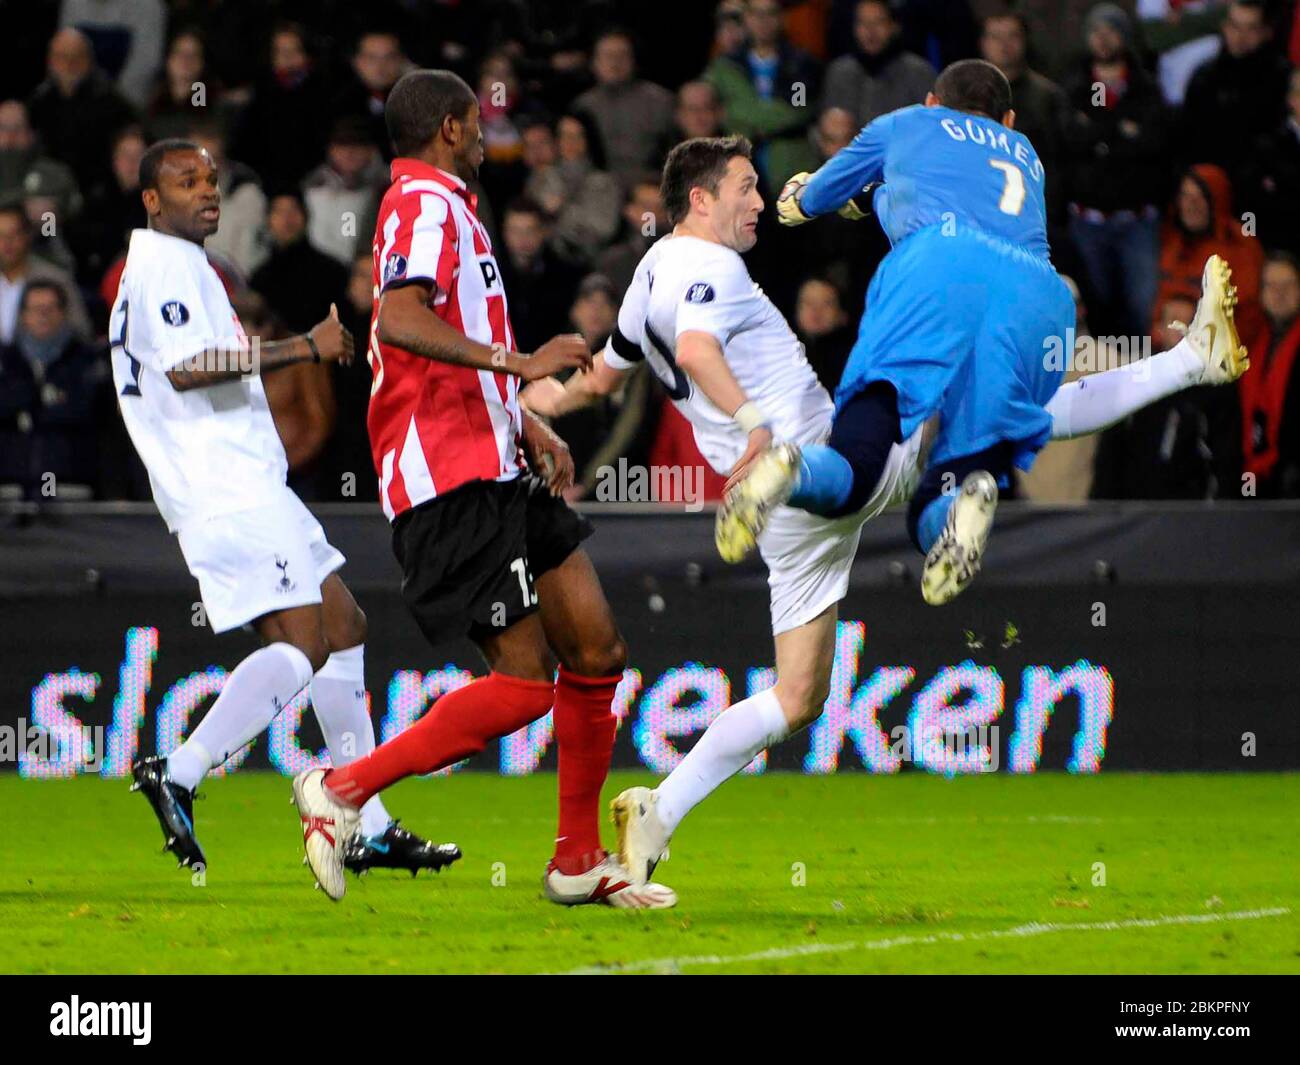 EINDHOVEN, NEDERLAND. MARCH 12: Robbie Keane (Spurs) gets flattened by Heurelho Gomes of PSV Eindhoven During UEFA Cup Round of 16 Second Leg between Stock Photo